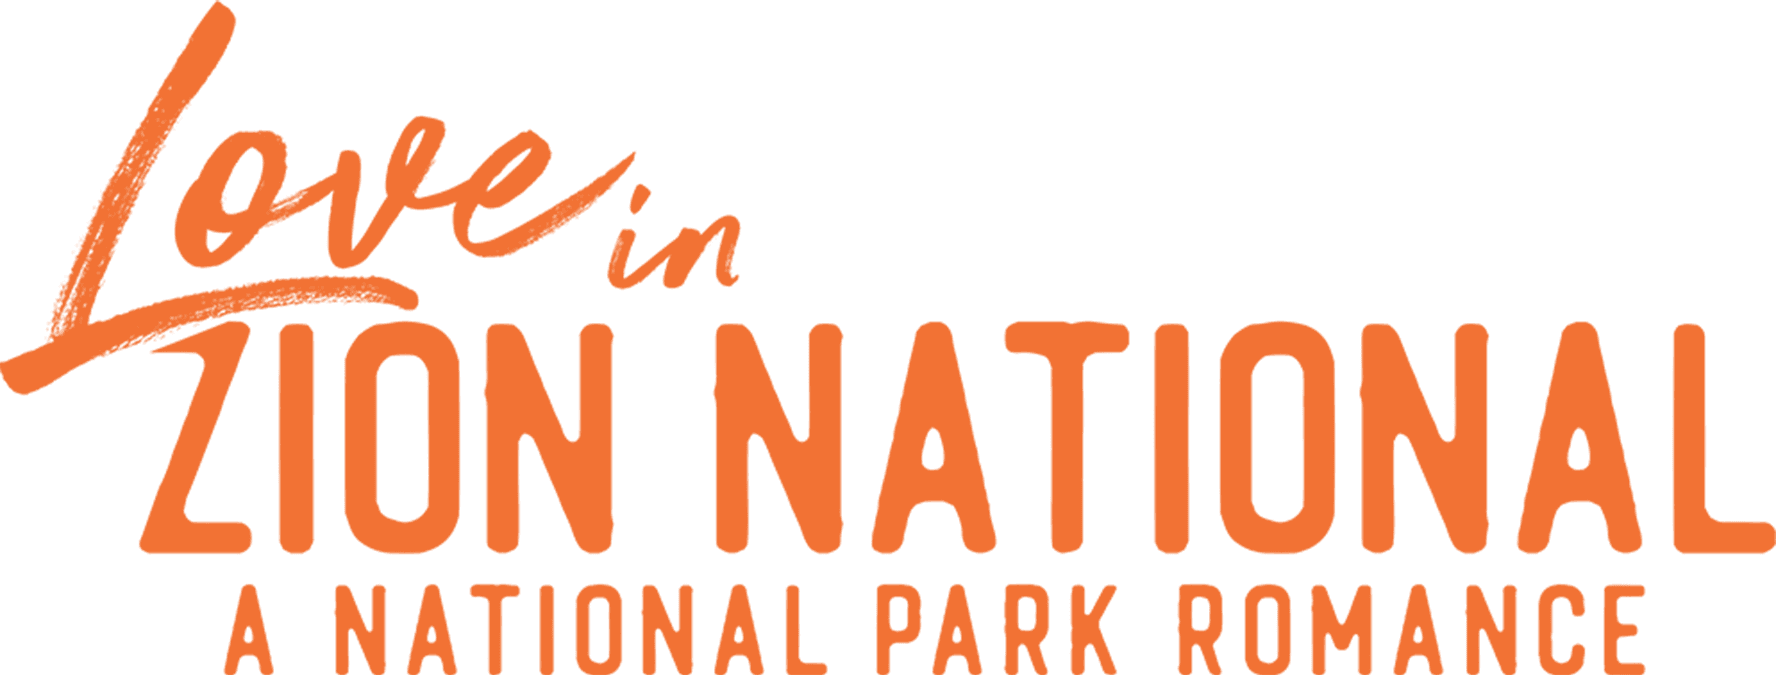 Love in Zion National: A National Park Romance logo